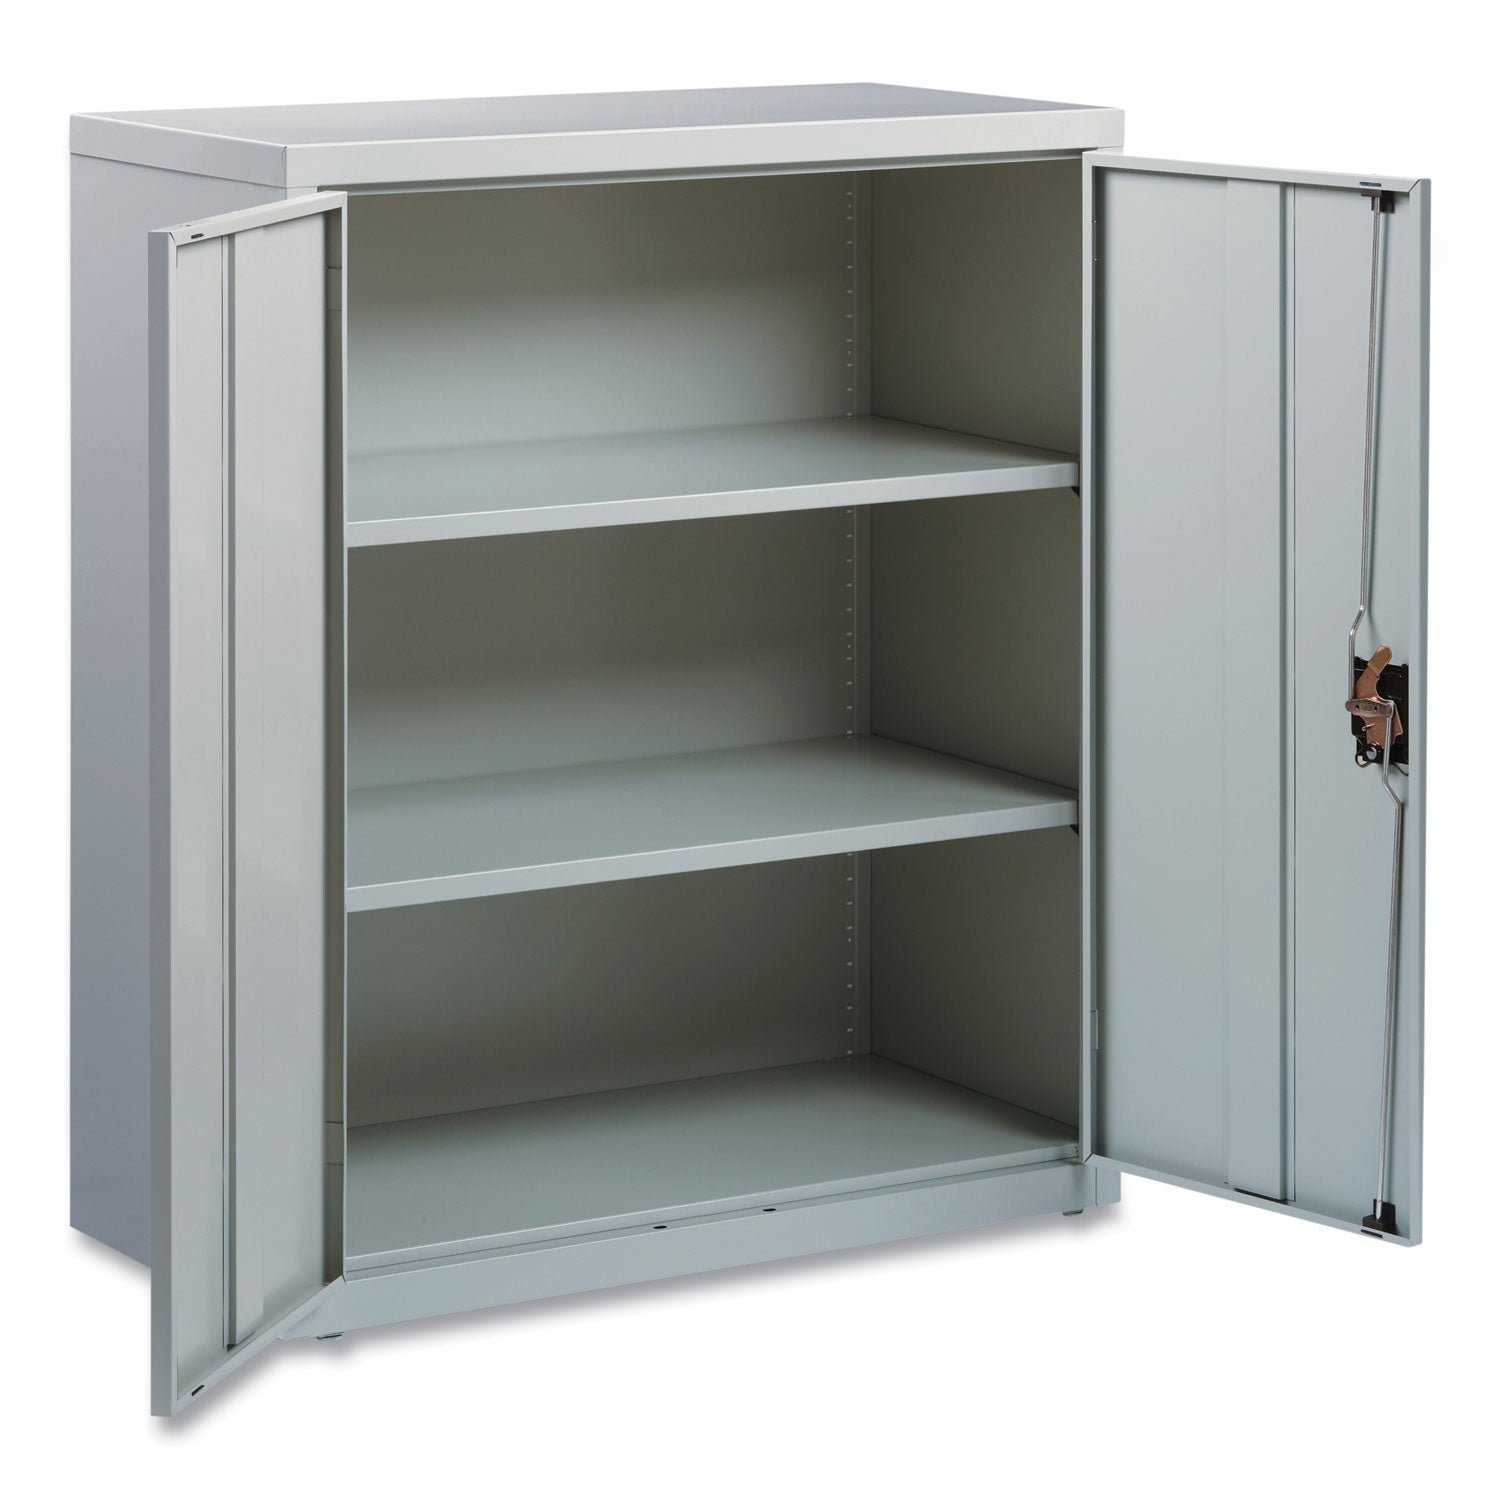 fully-assembled-storage-cabinets-3-shelves-36-x-18-x-42-light-gray_oifcm4218lg - 5